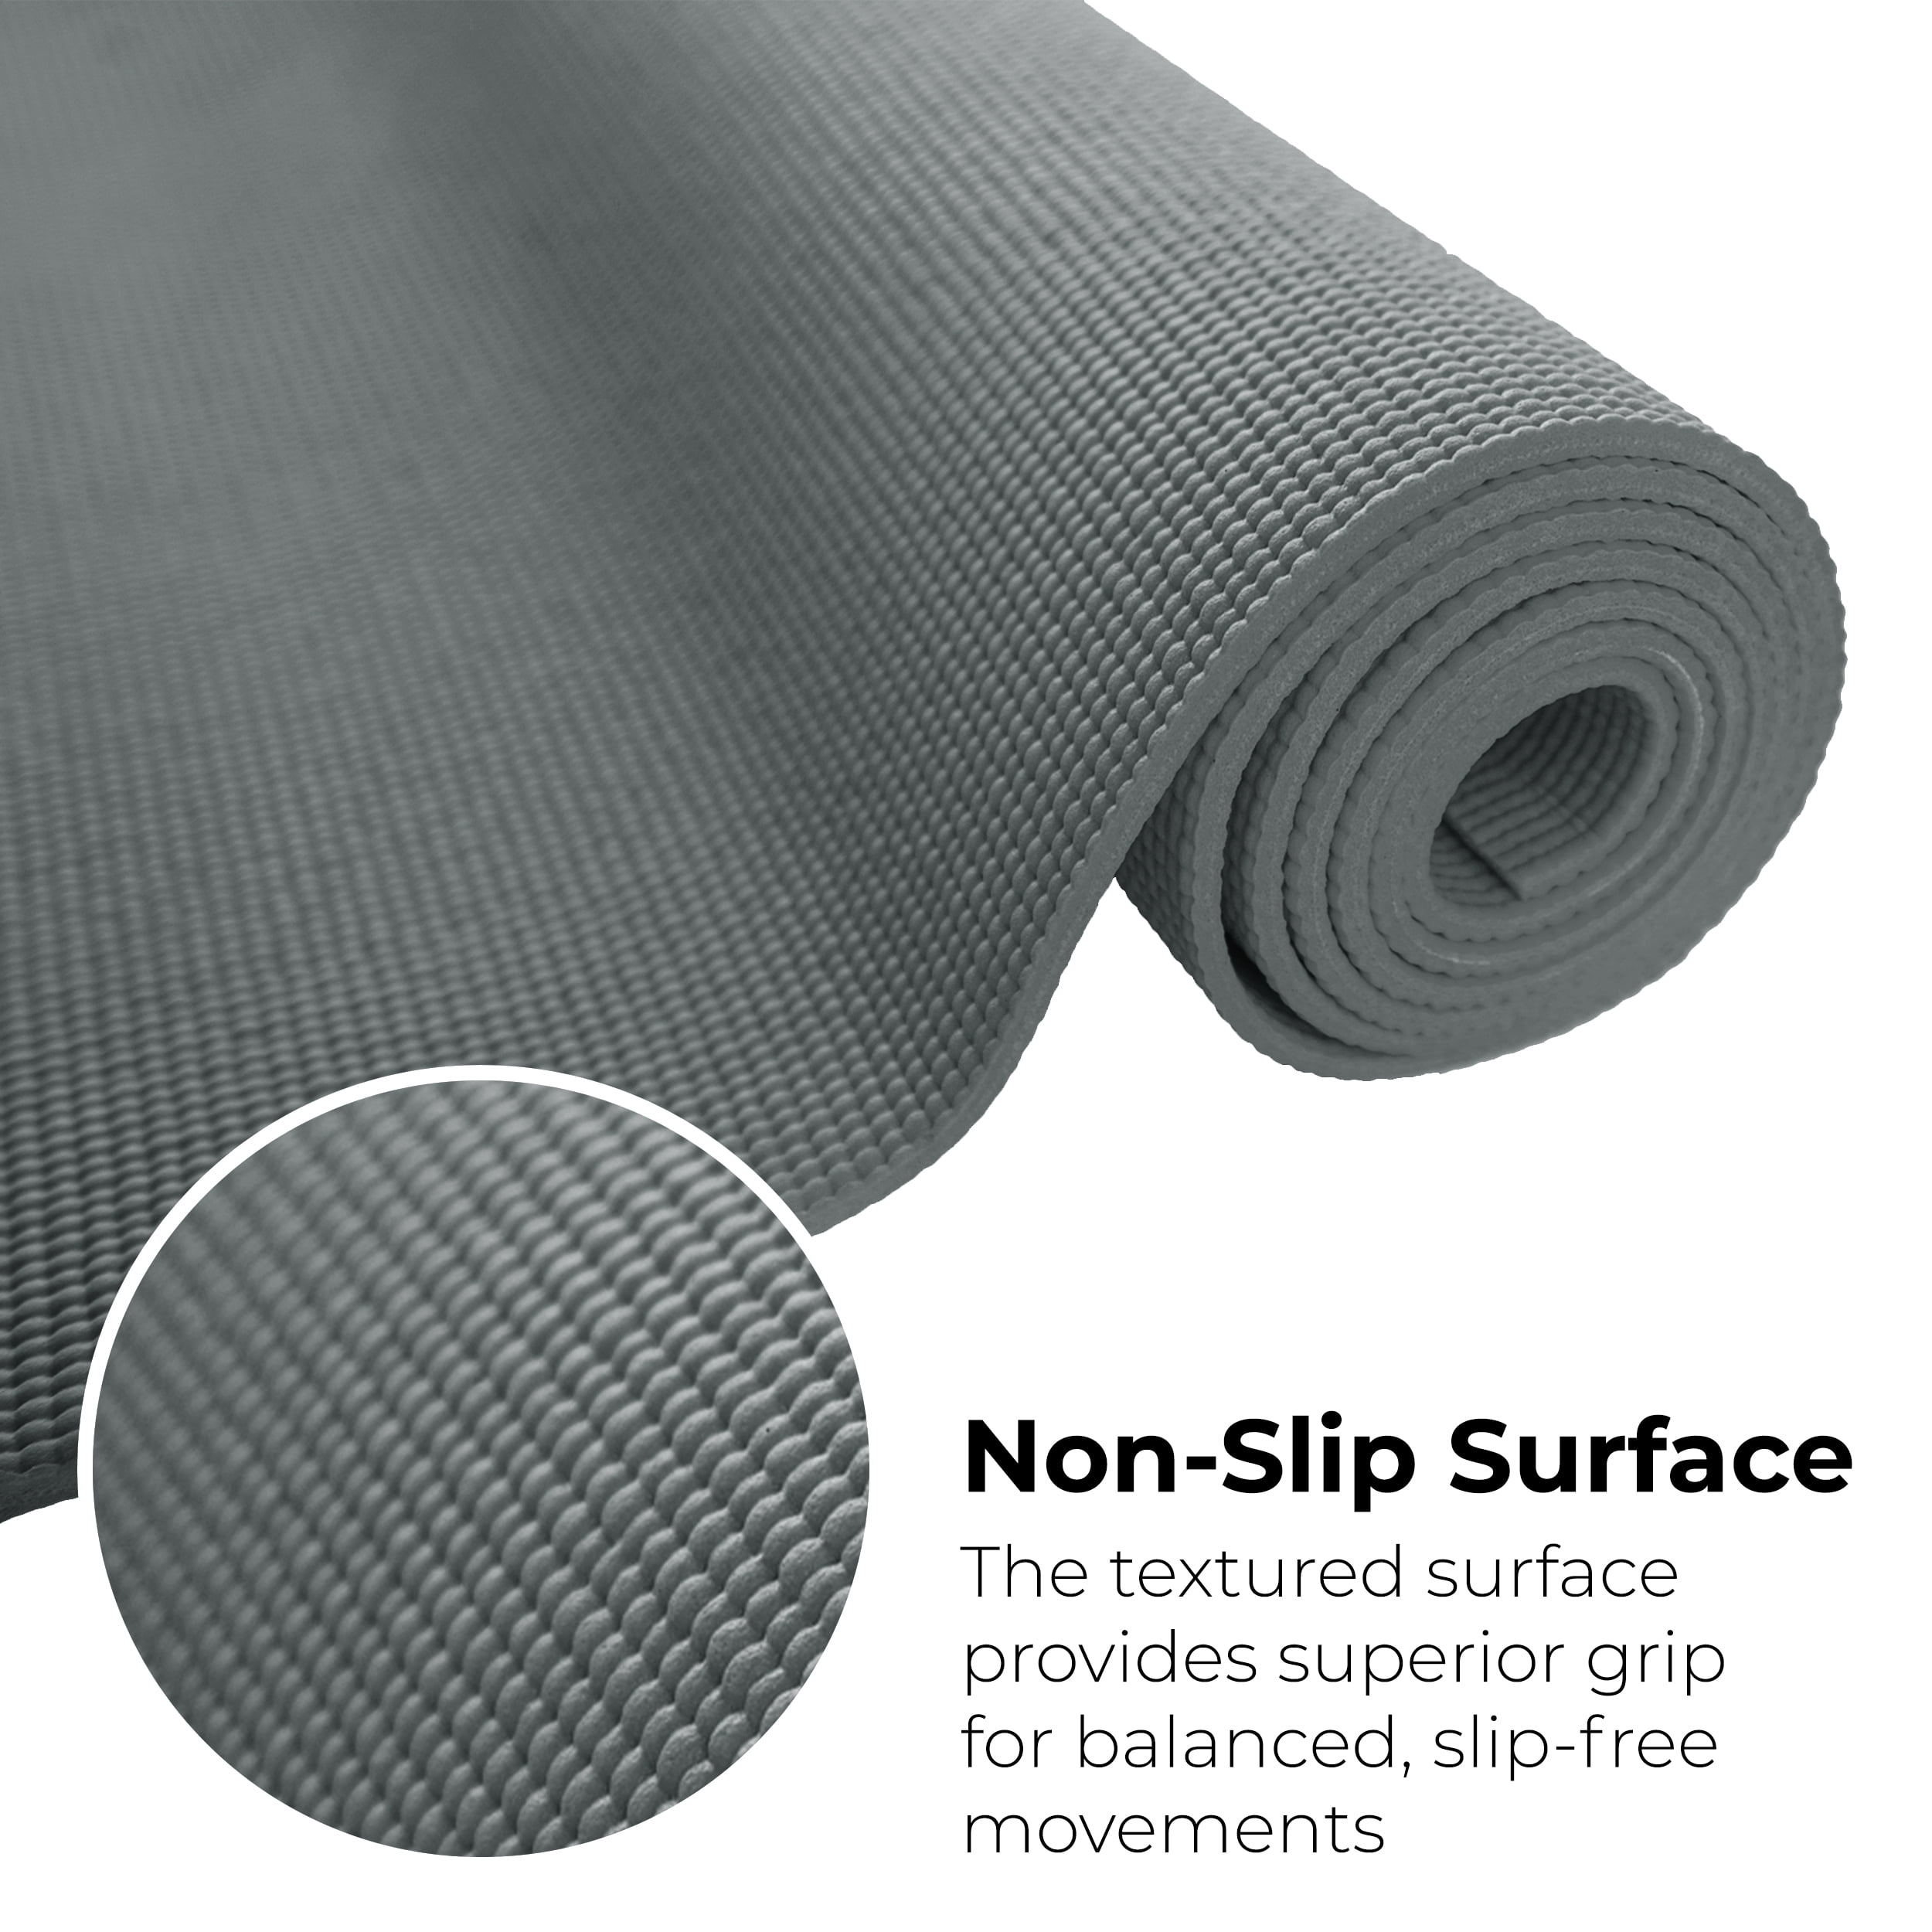 Hello Fit Yoga Mats, Bulk 20 Pack, 68x24x1/8 inches, Affordable Exercise  Gym Mats with Non-Slip Texture, Easy to Clean, Assorted